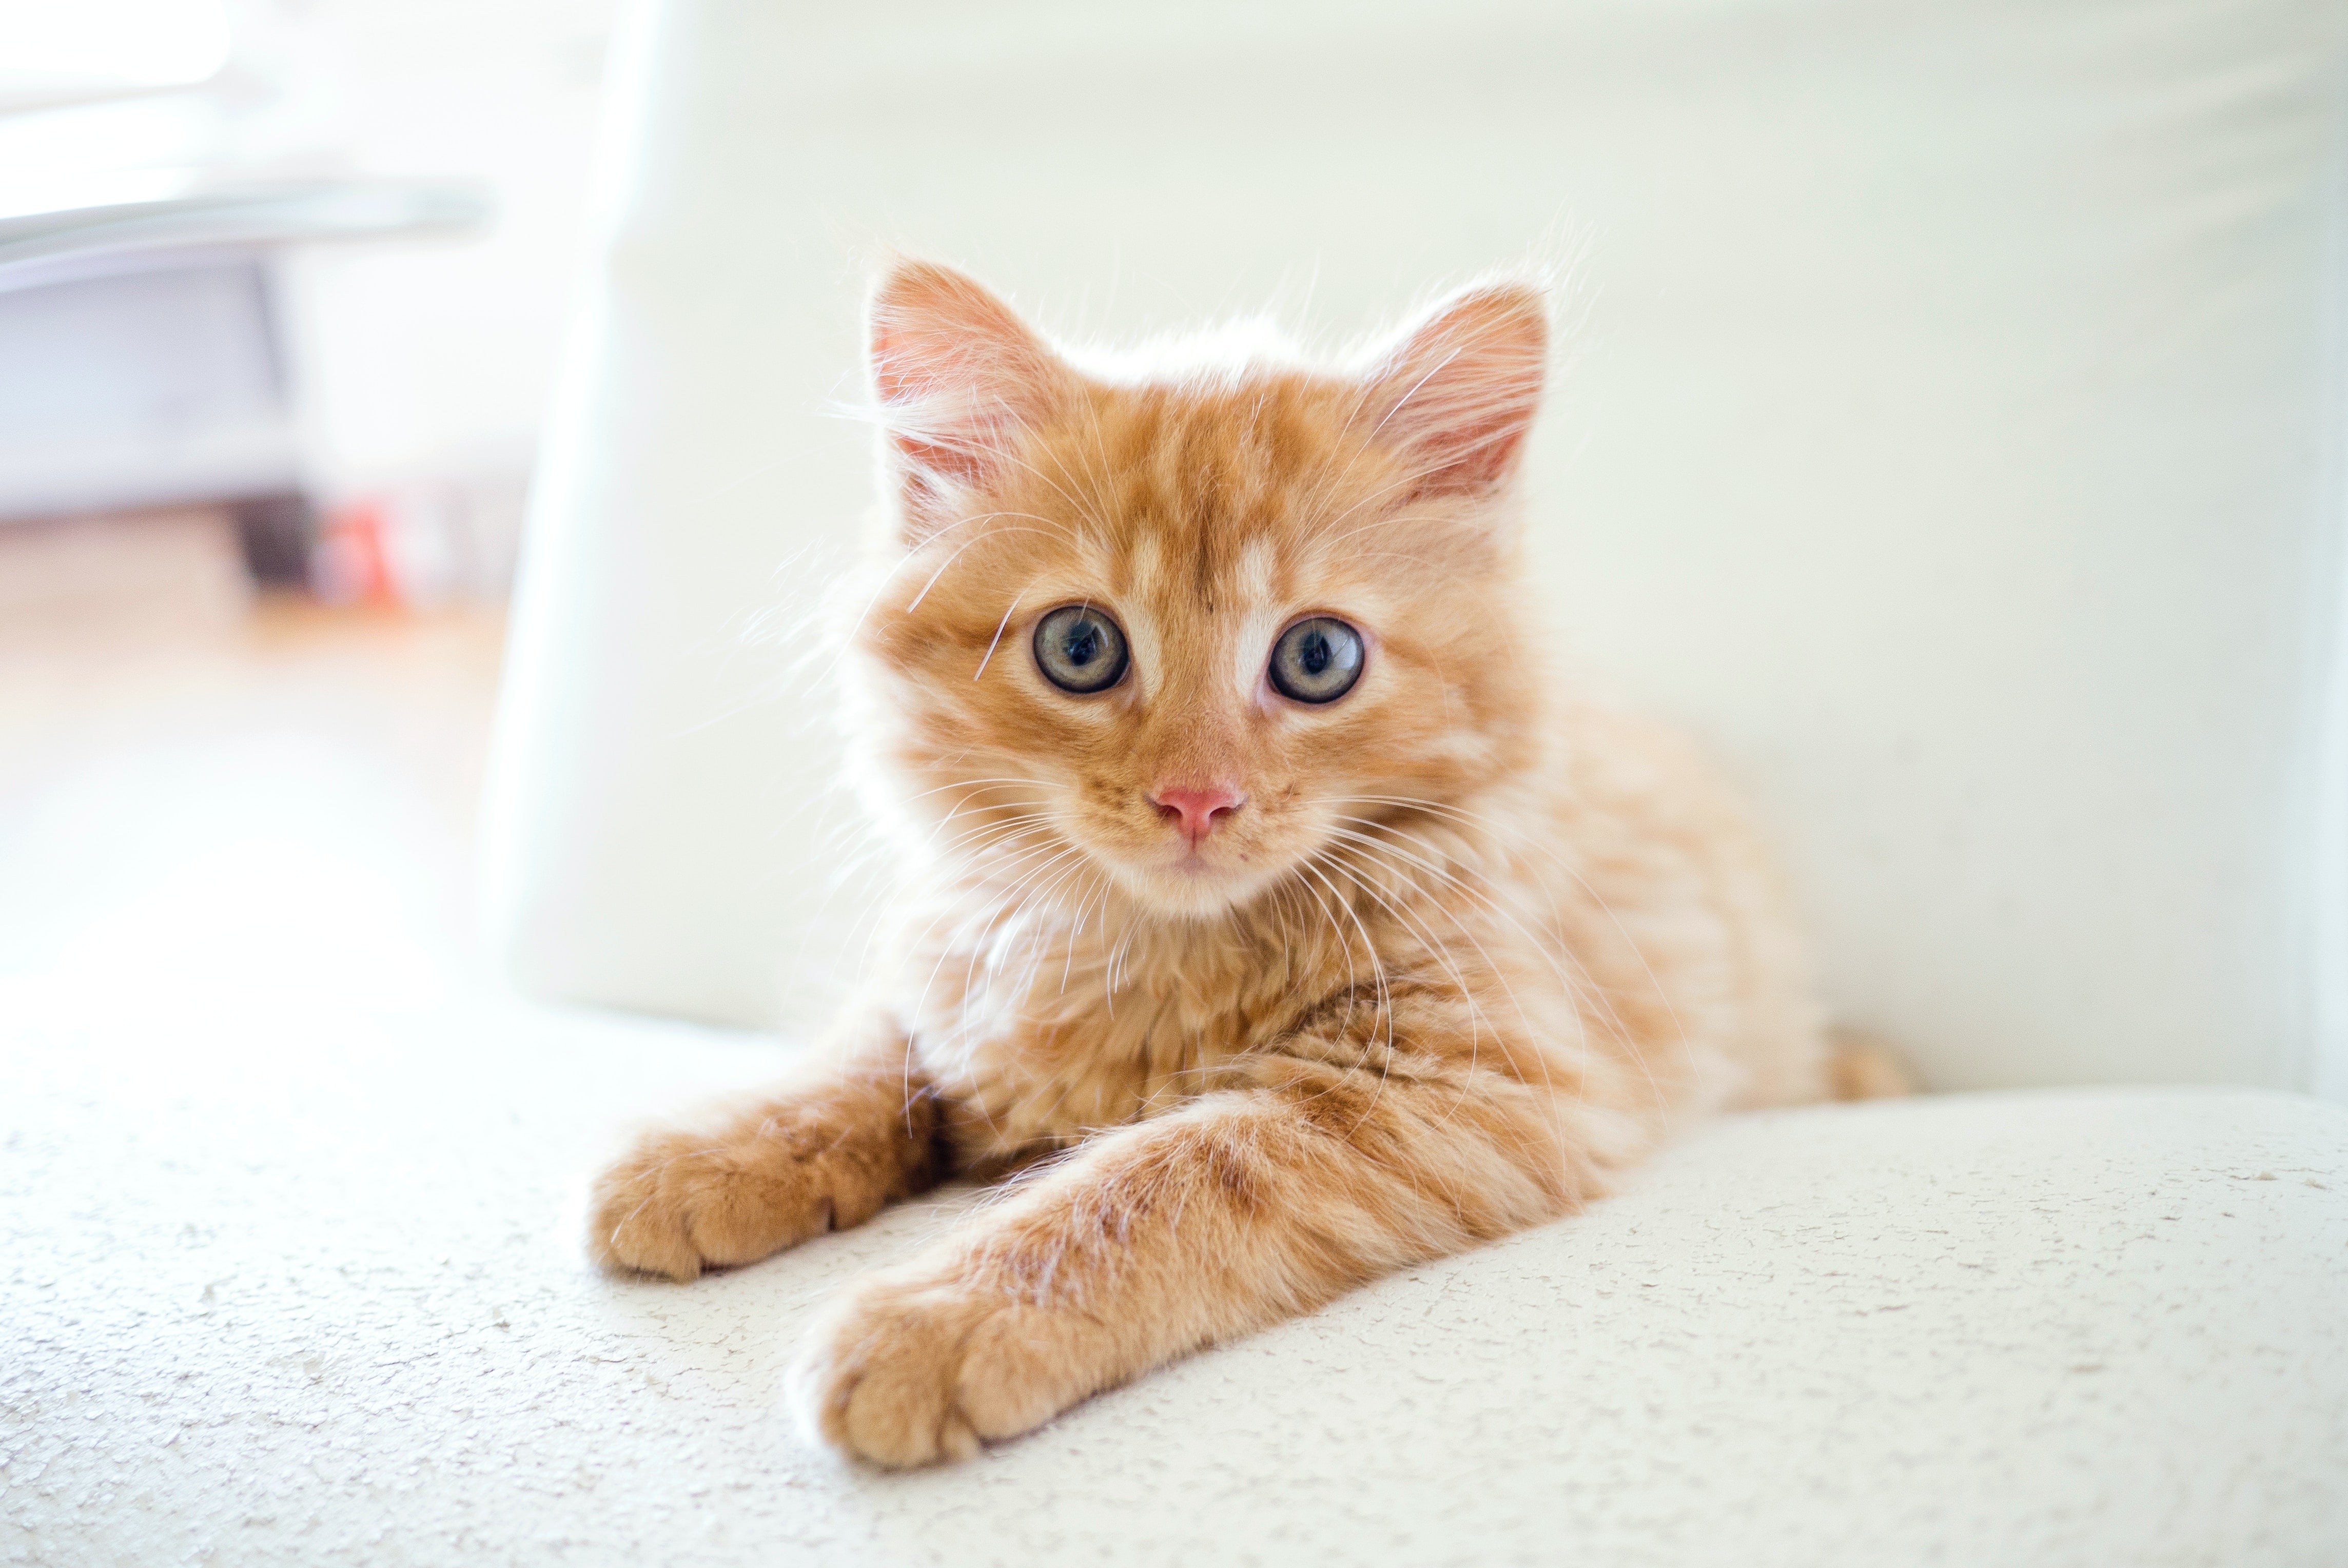 Young ginger kitten with big eyes looking at camera